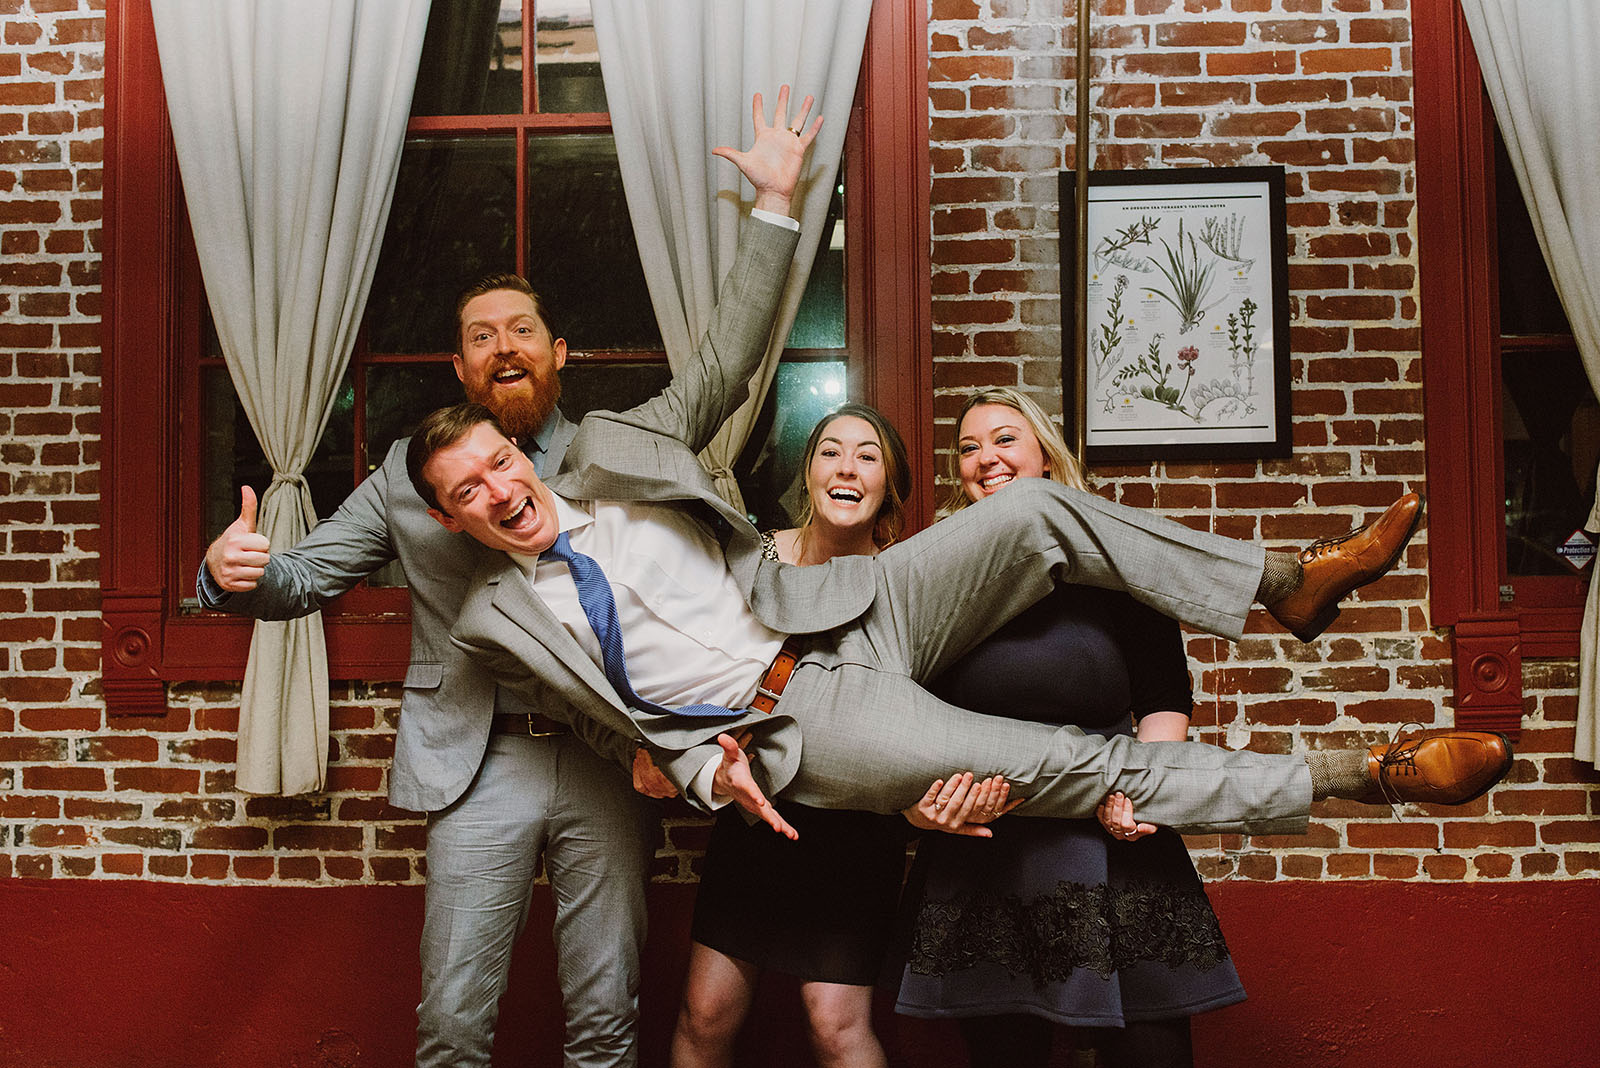 Silly portrait of the Groom and his siblings at an Intimate Restaurant Wedding in Portland, OR